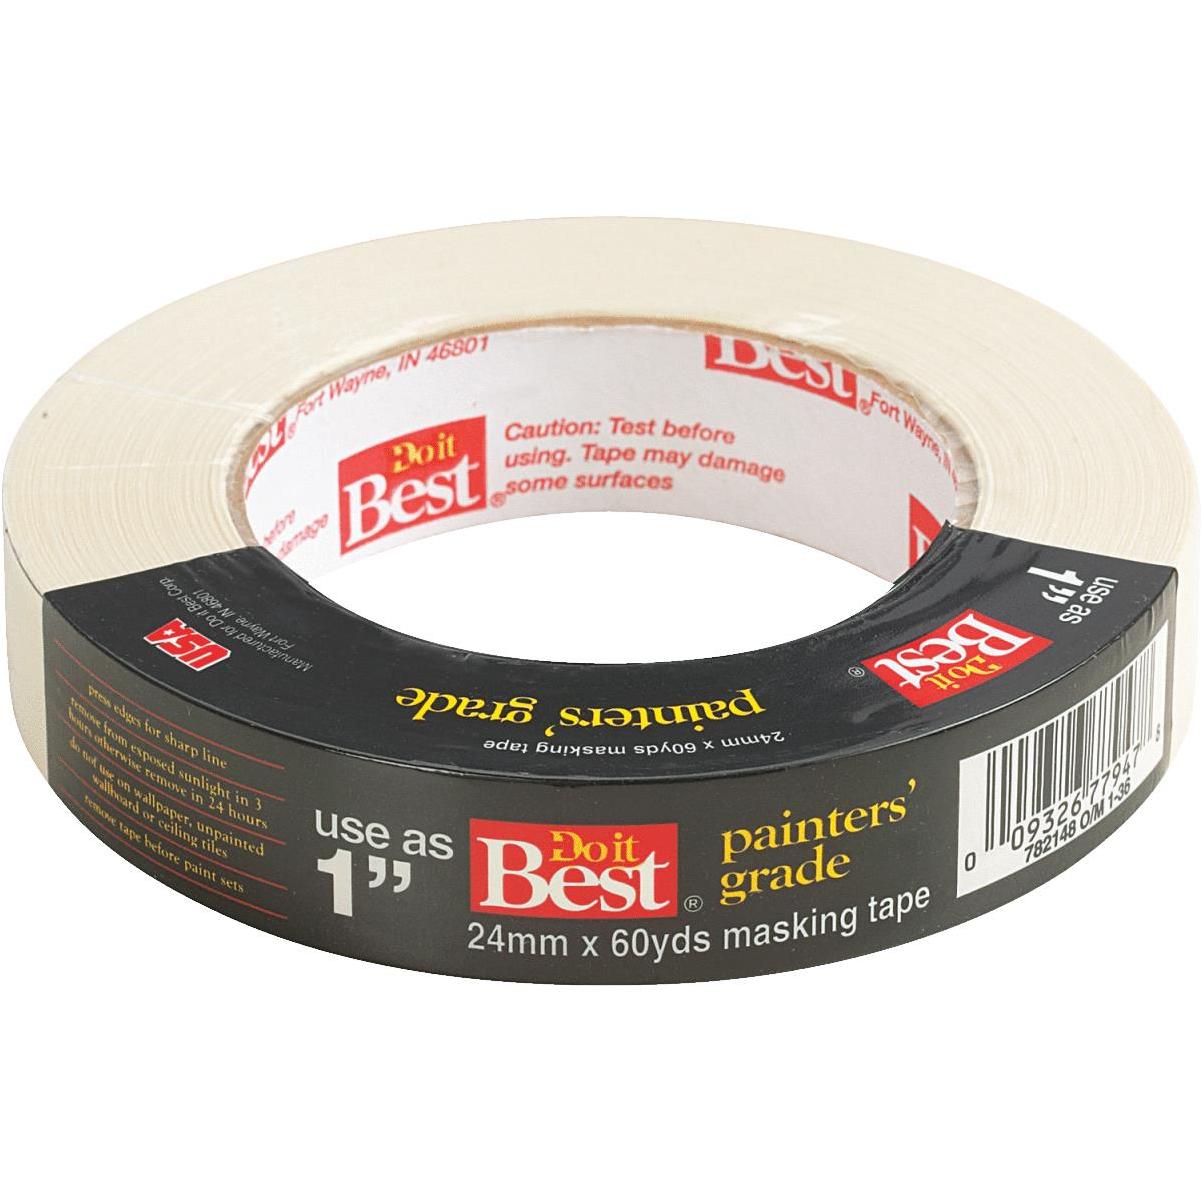 3M Scotch 0.94 In. x 60 Yd. Delicate Surface Painter's Tape